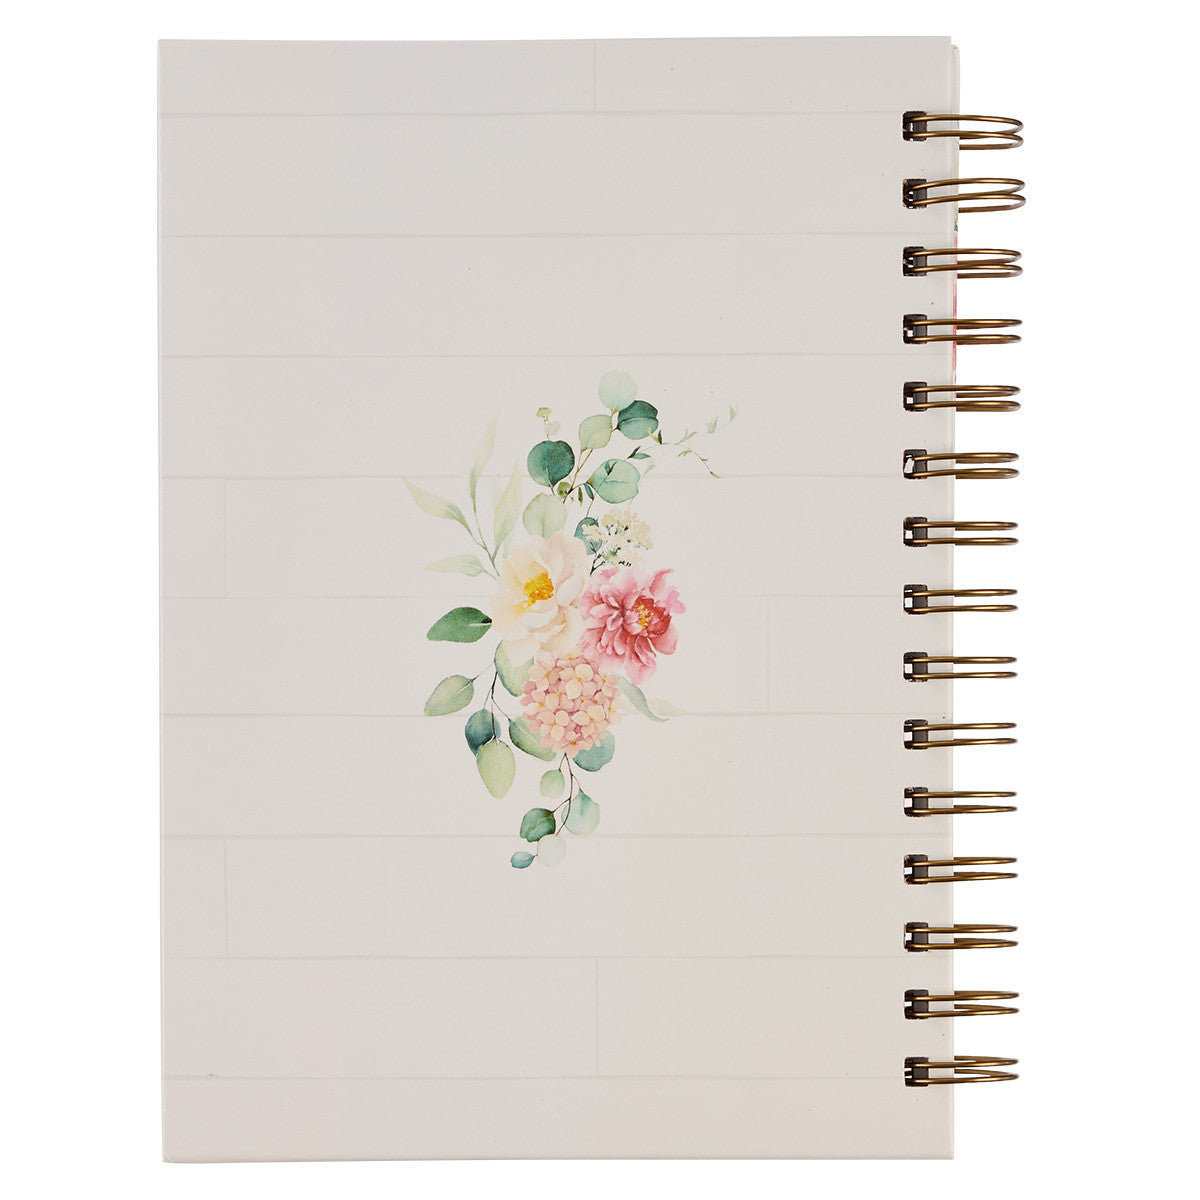 Walk By Faith White Floral Wirebound Journal - 2 Corinthians 5:7 - The Christian Gift Company